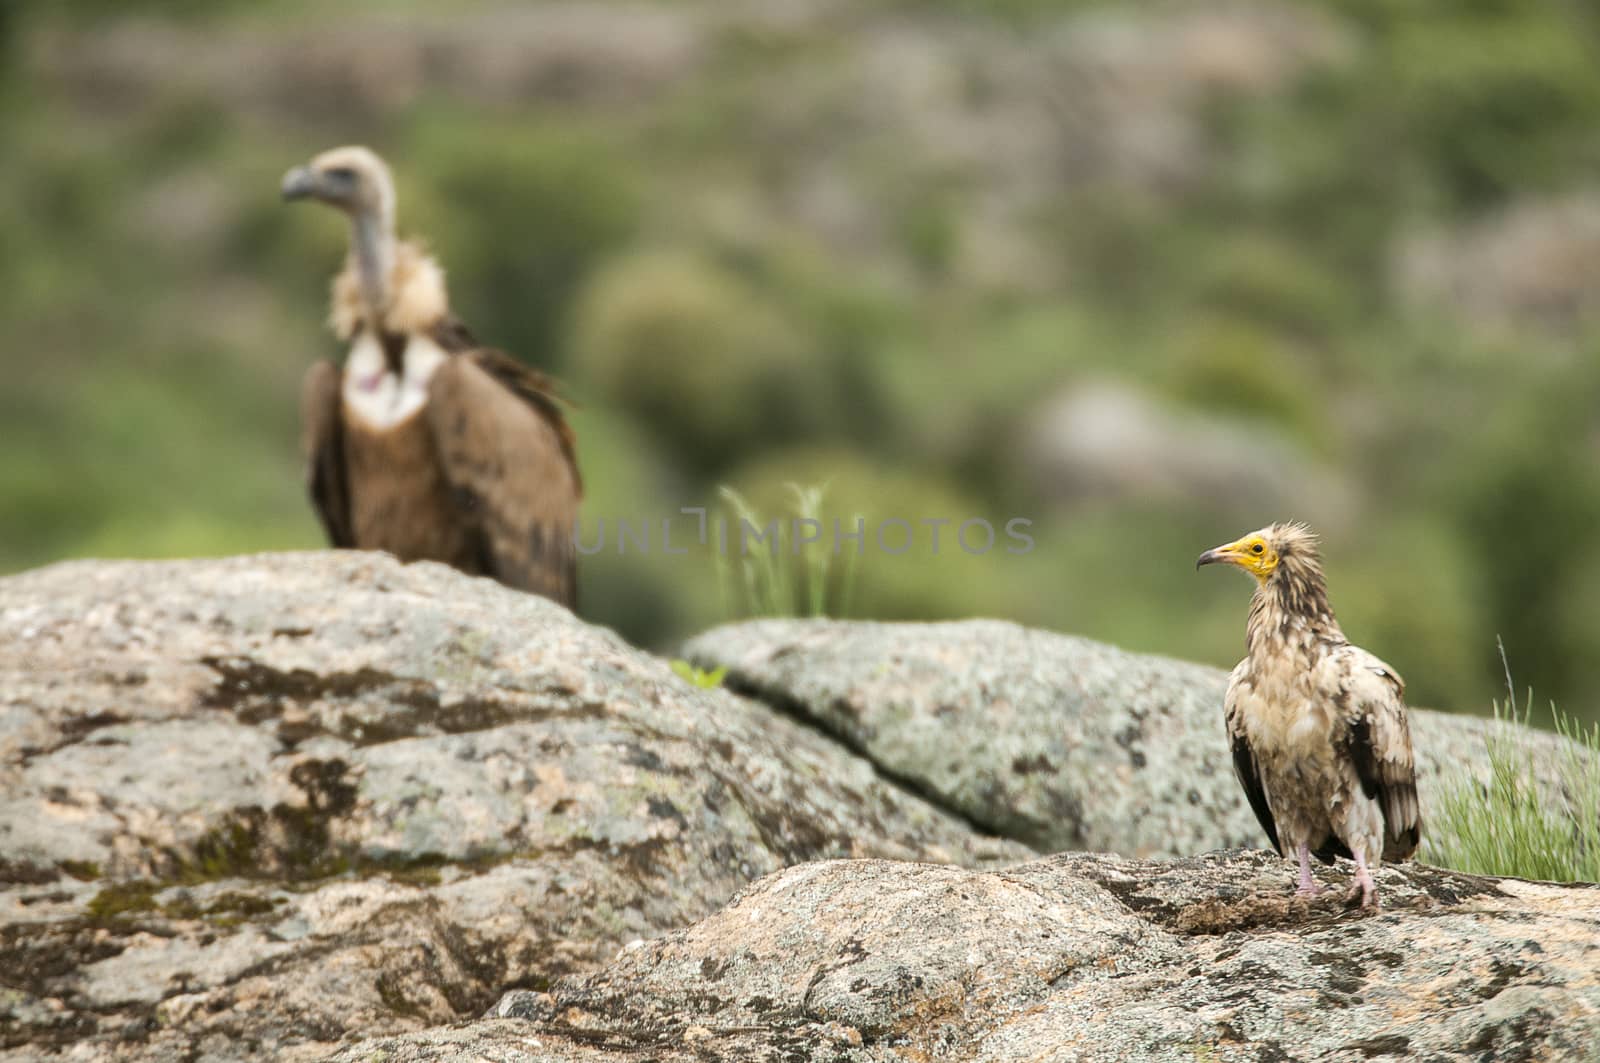 Griffon Vulture (Gyps fulvus) Egyptian Vulture (Neophron percnop by jalonsohu@gmail.com